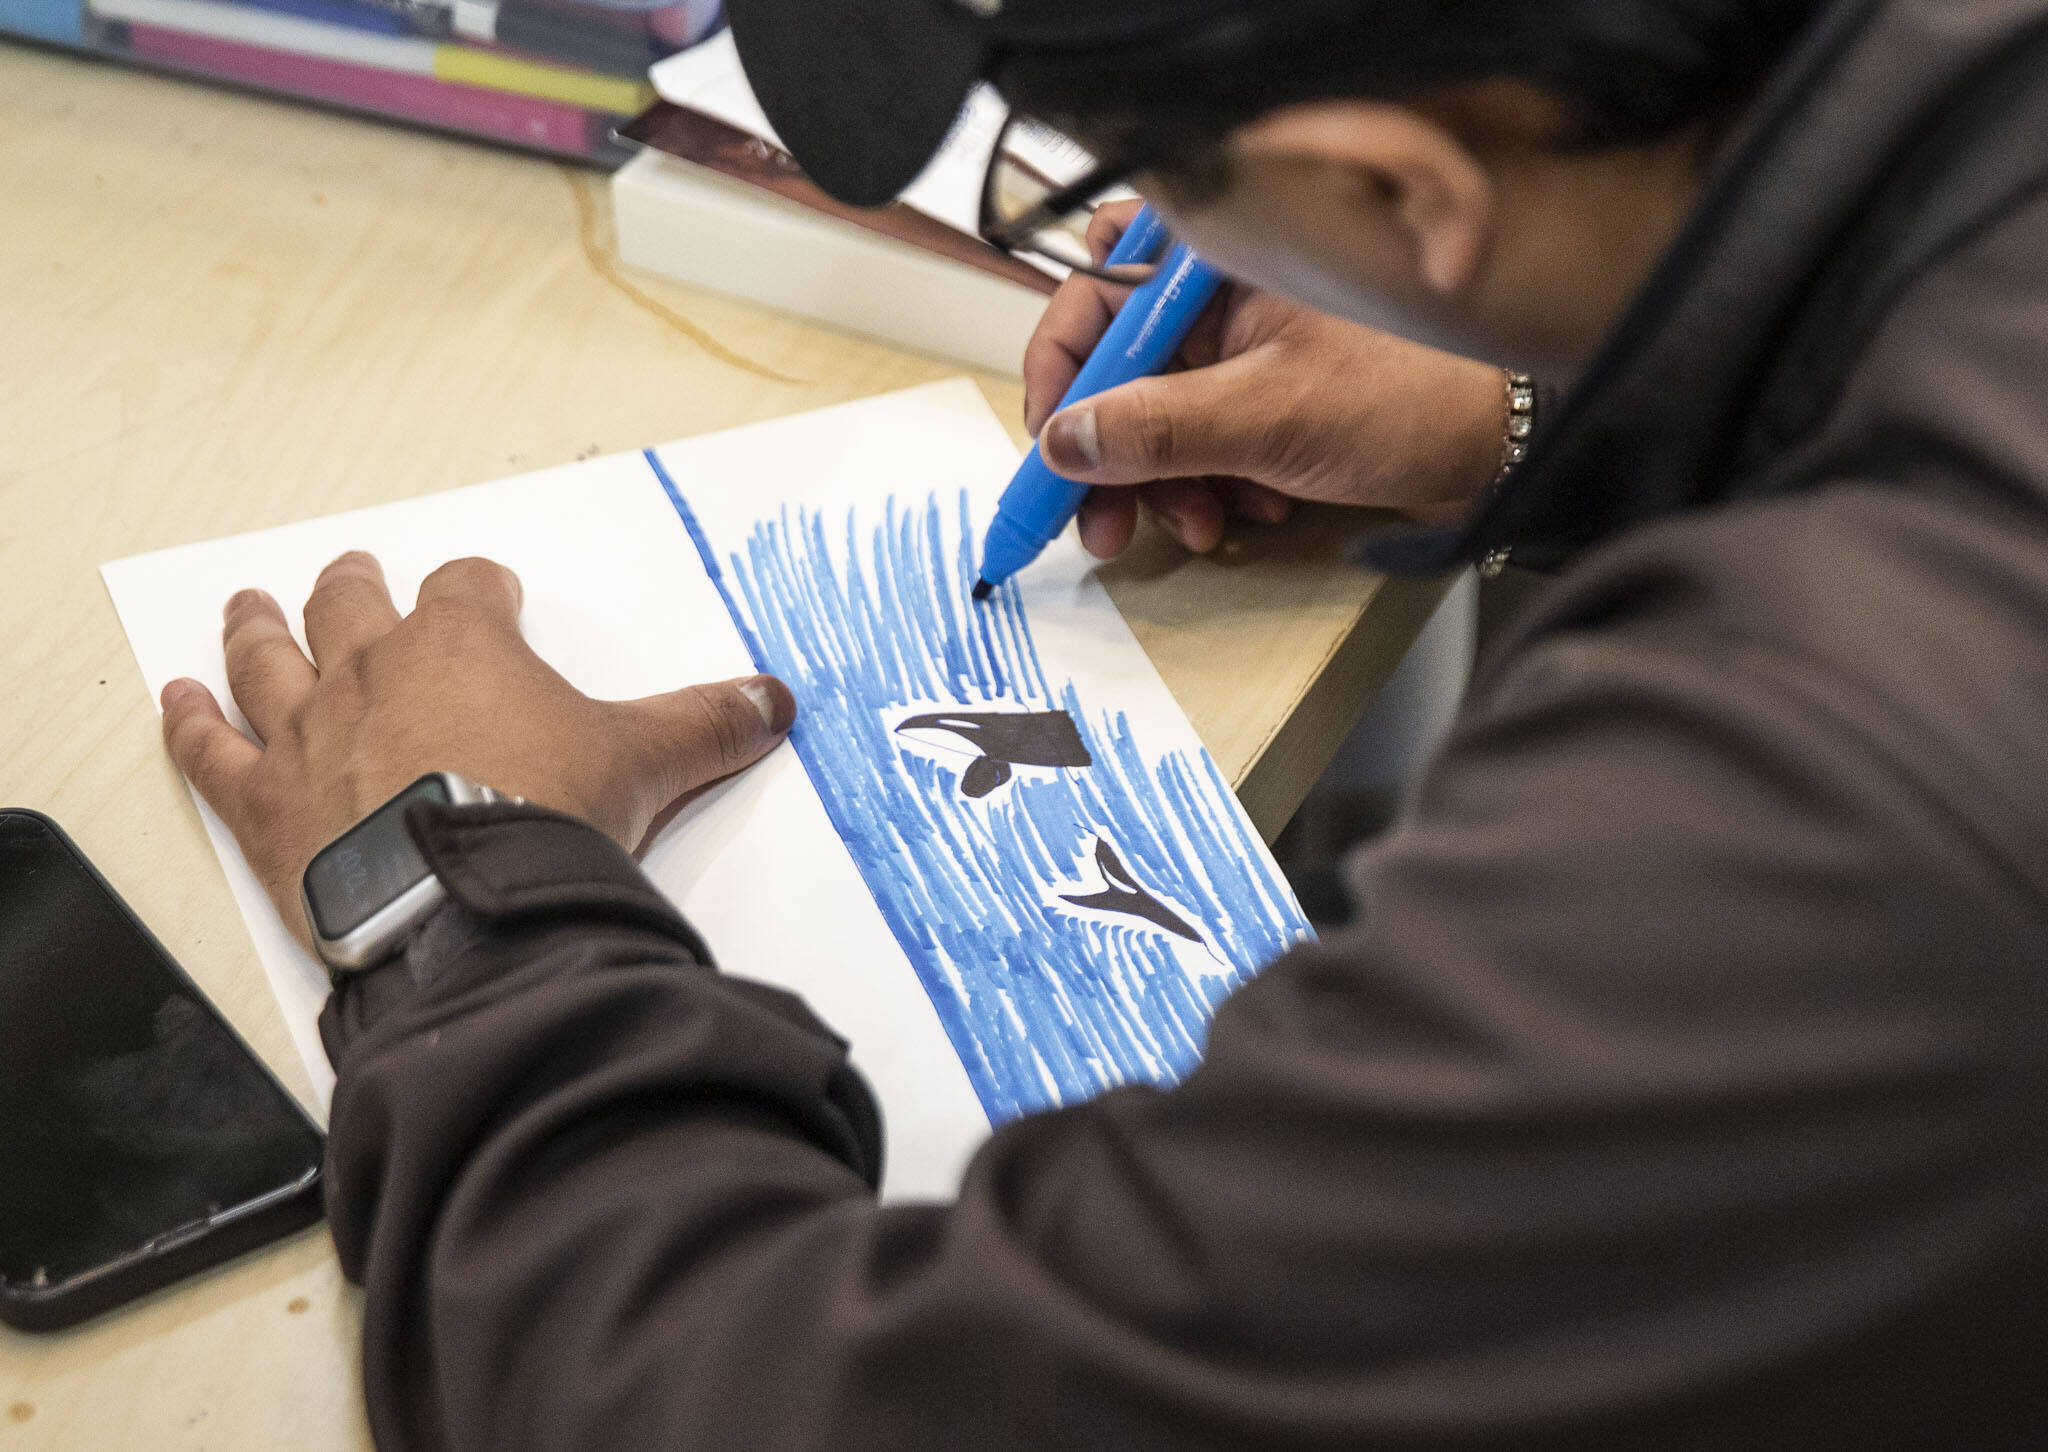 Giovanni S. works on an an orca drawing in the art studio at the Everett Recovery Cafe on Wednesday, May 10, 2023 in Everett, Washington. (Olivia Vanni / The Herald)